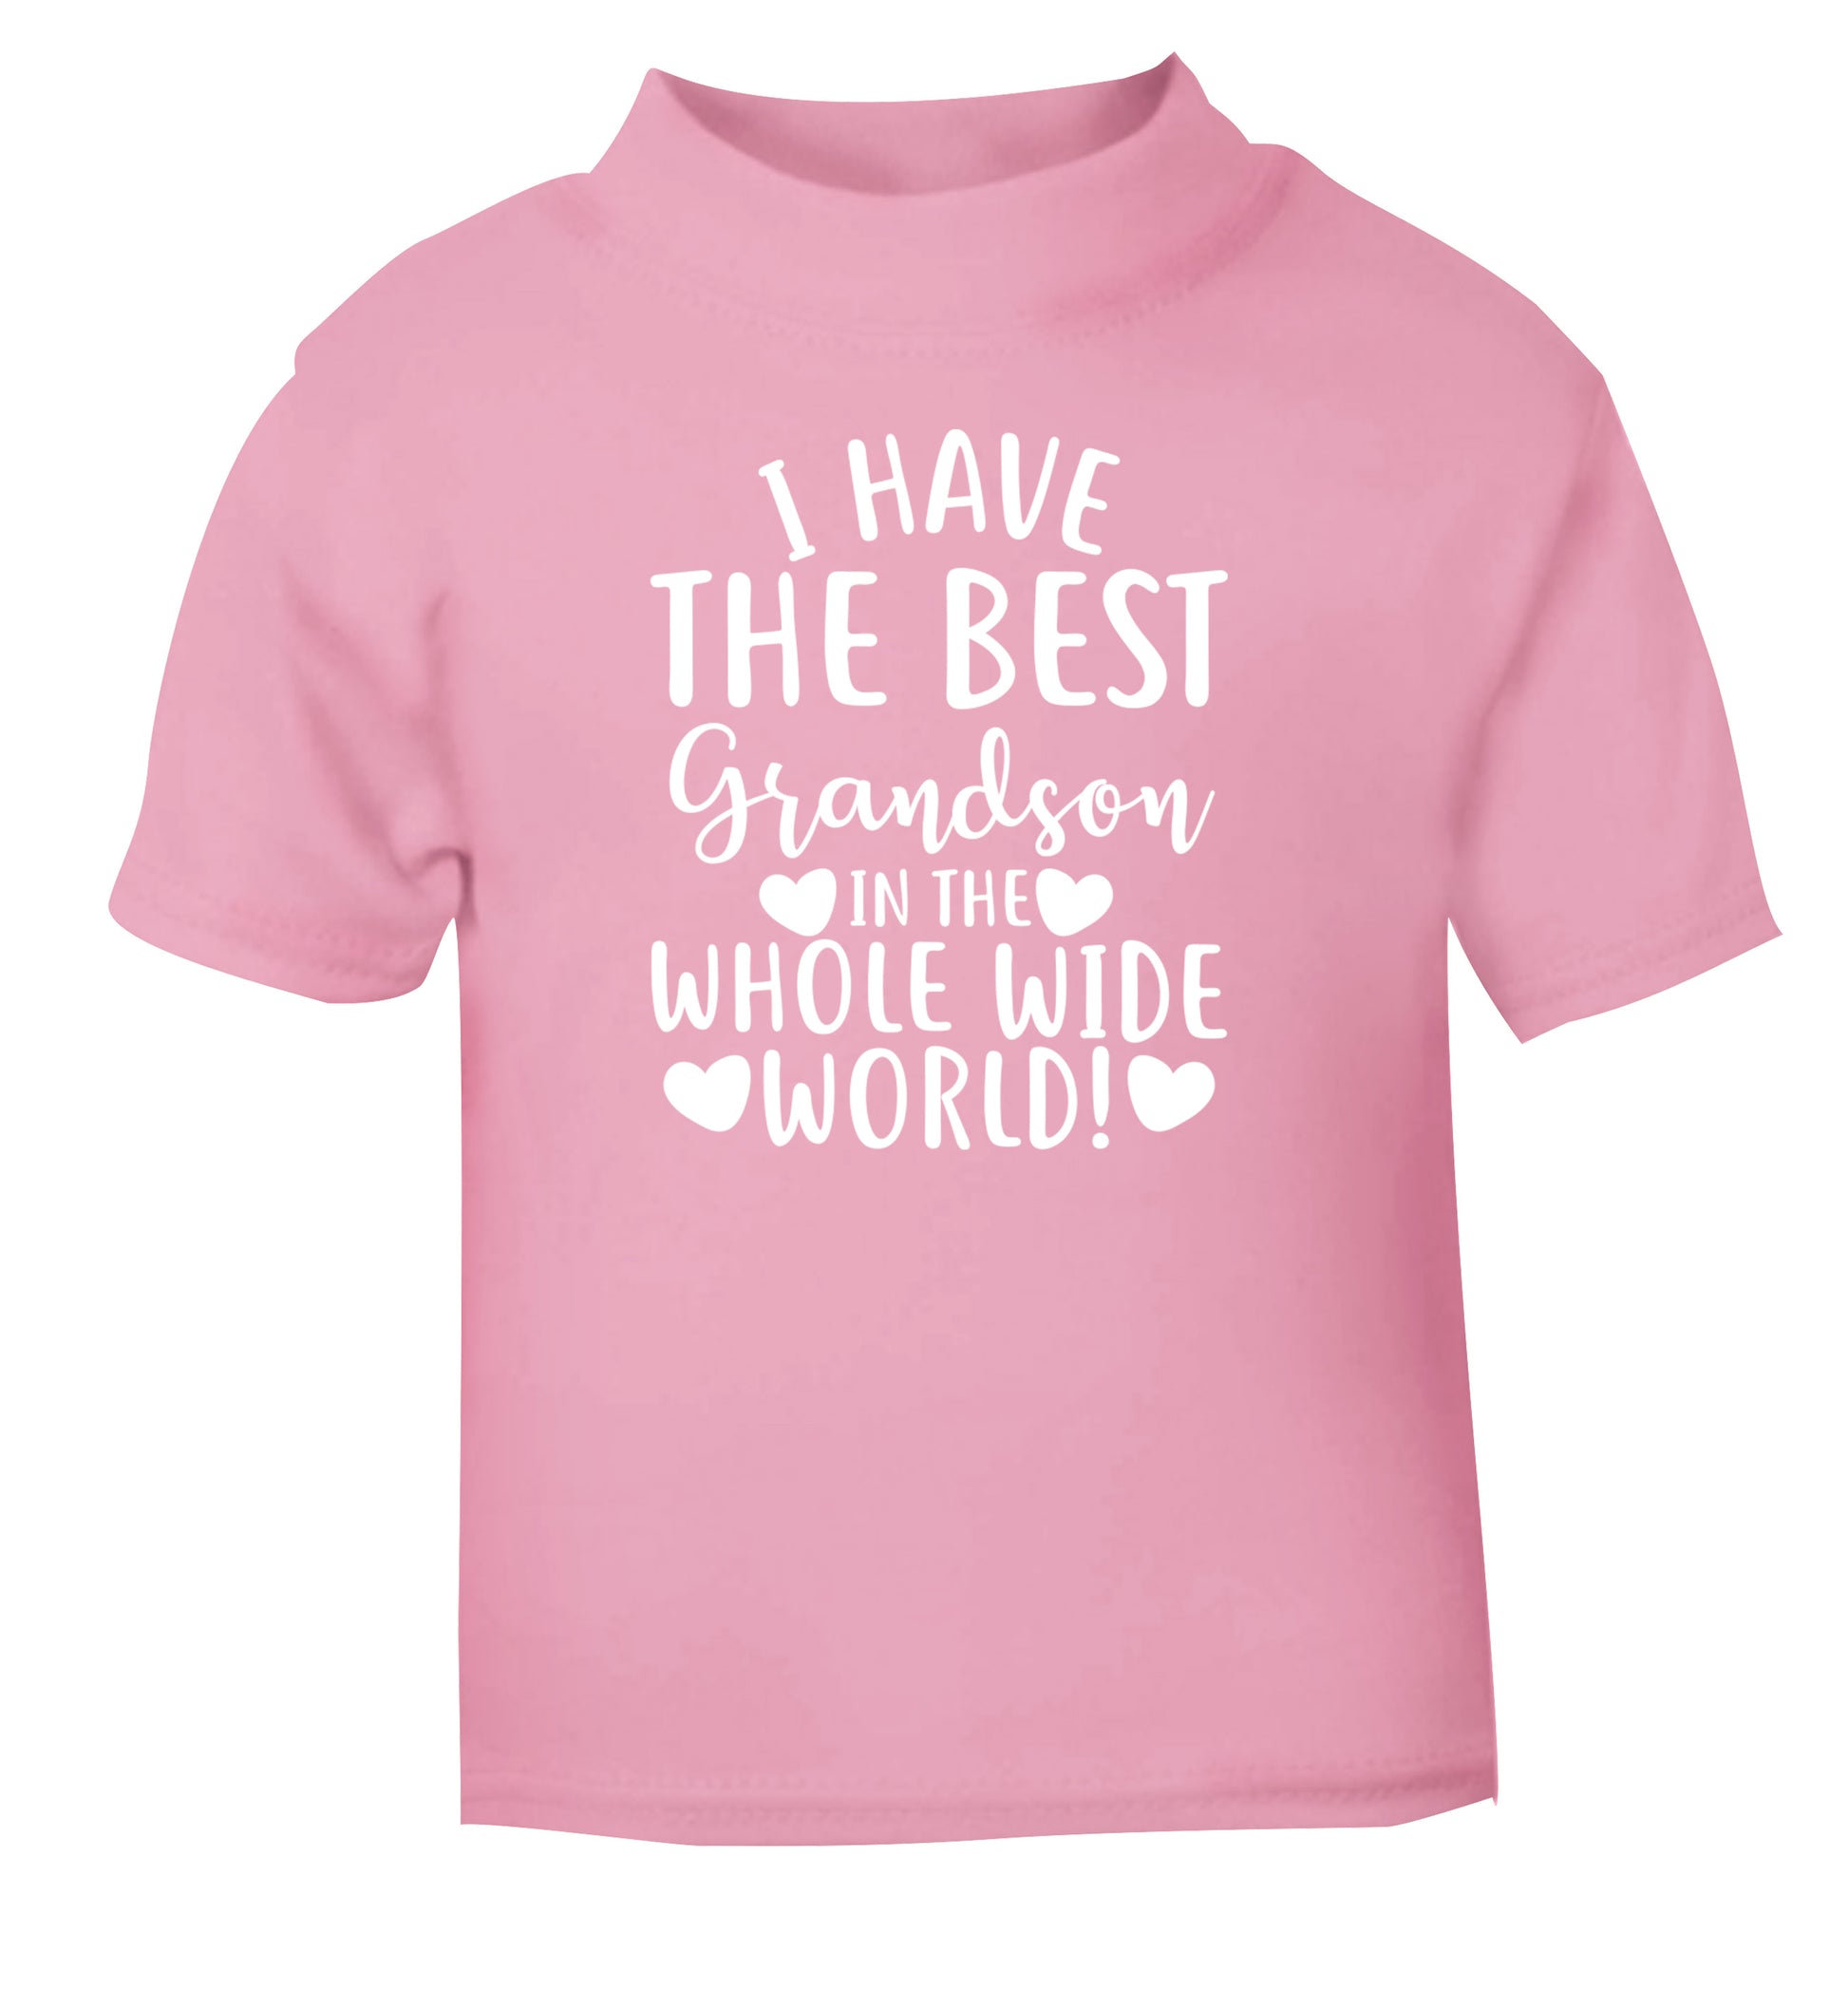 I have the best grandson in the whole wide world! light pink Baby Toddler Tshirt 2 Years